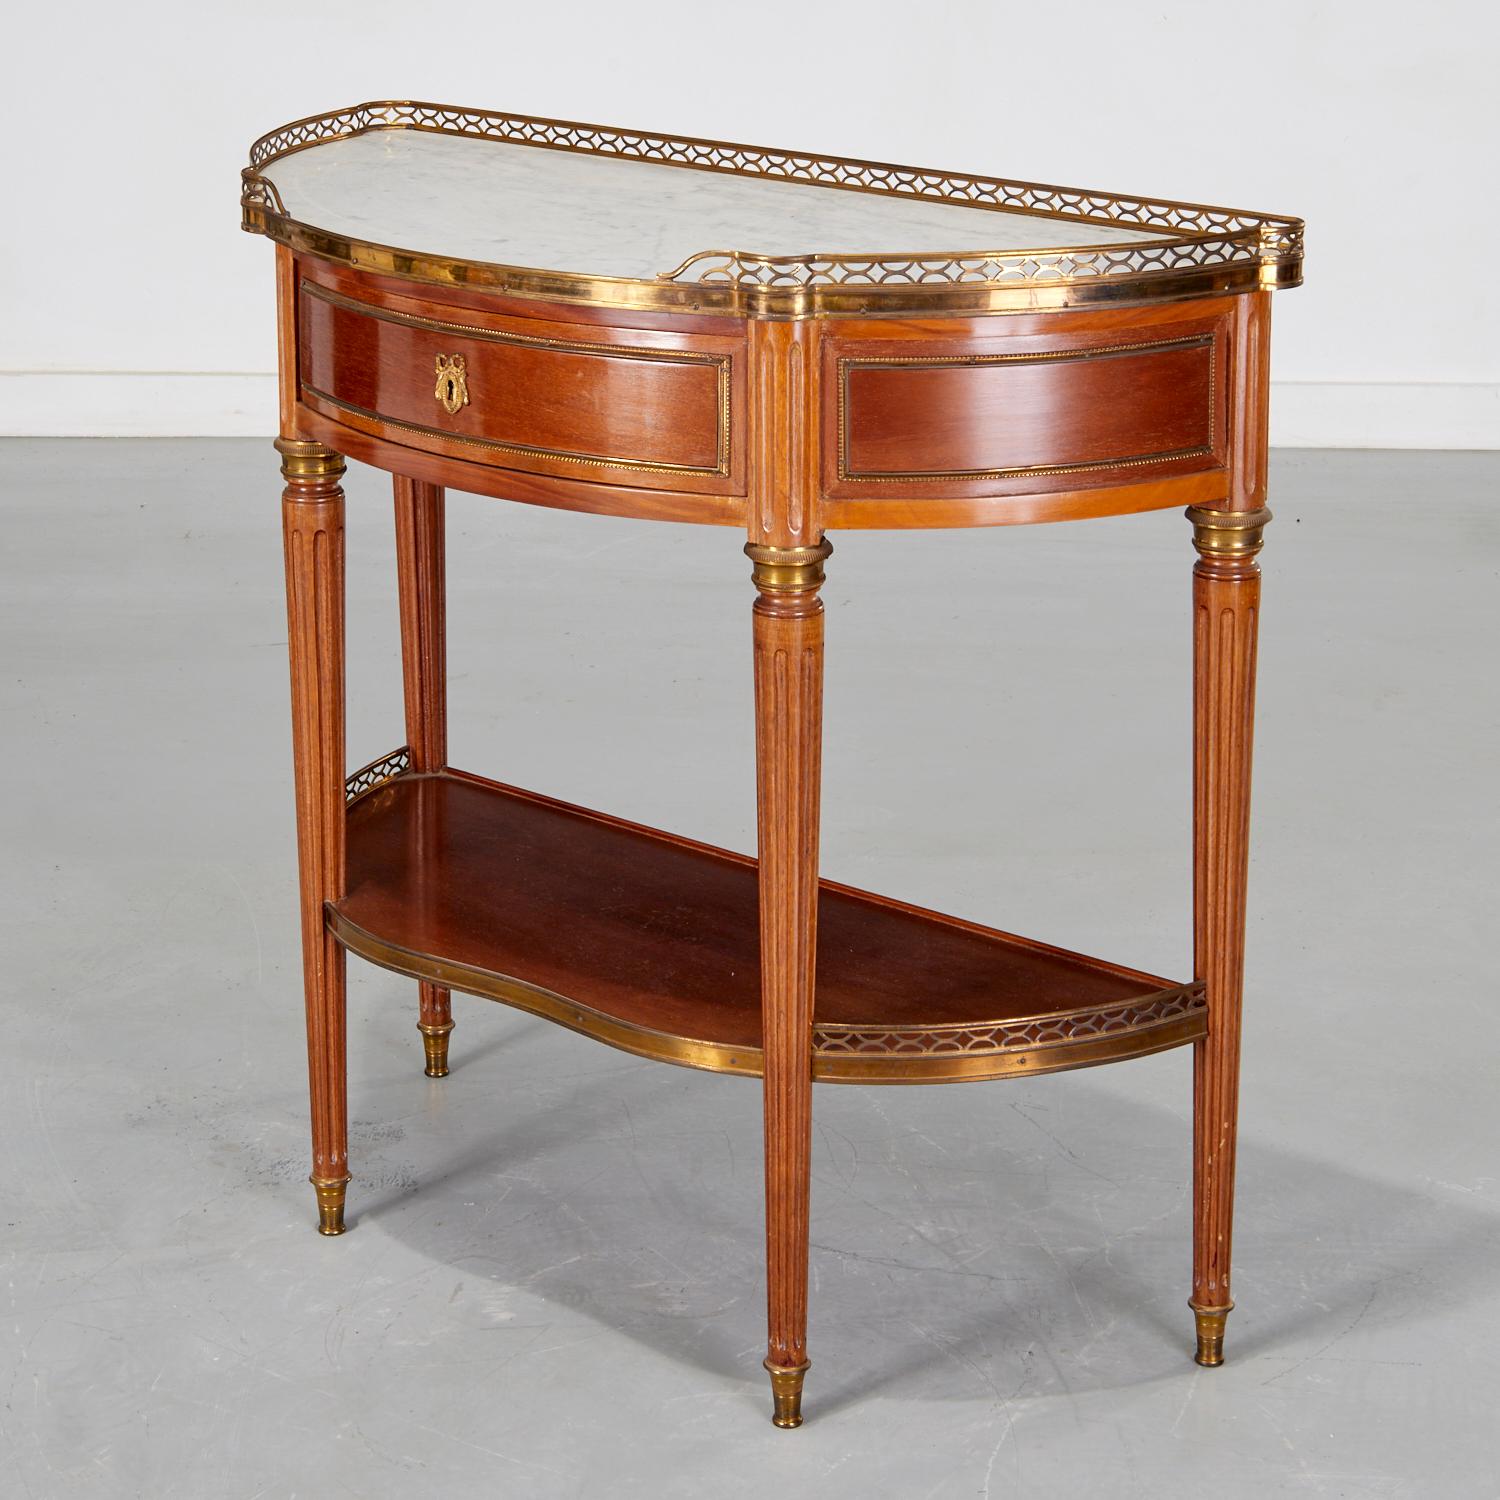 Mid 20th c., a beautiful Louis XVI style bronze mounted demilune console commissioned by celebrity decorator Michael Graves. The console has a marble top with a pierced brass gallery, a single drawer and lower bronze edged shelf on tapering fluted